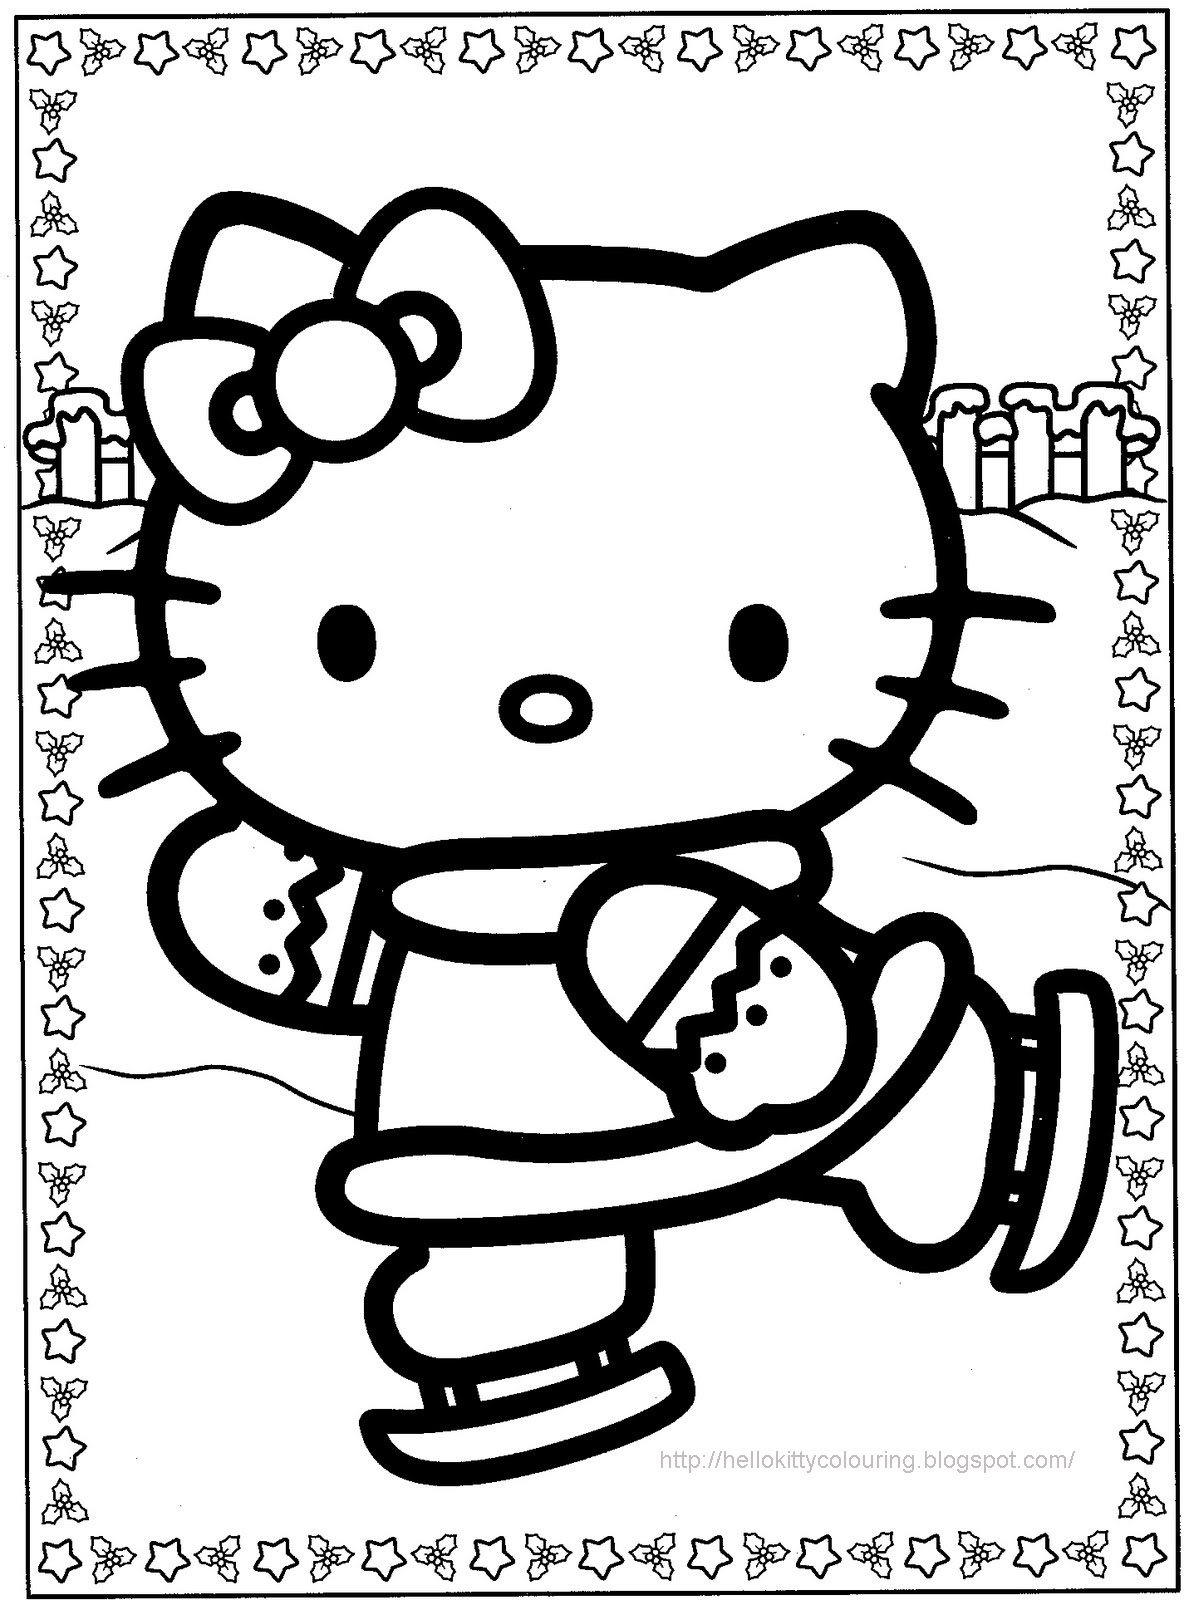 Download Hello Kitty Christmas Coloring Pages #1 | Hello Kitty Forever